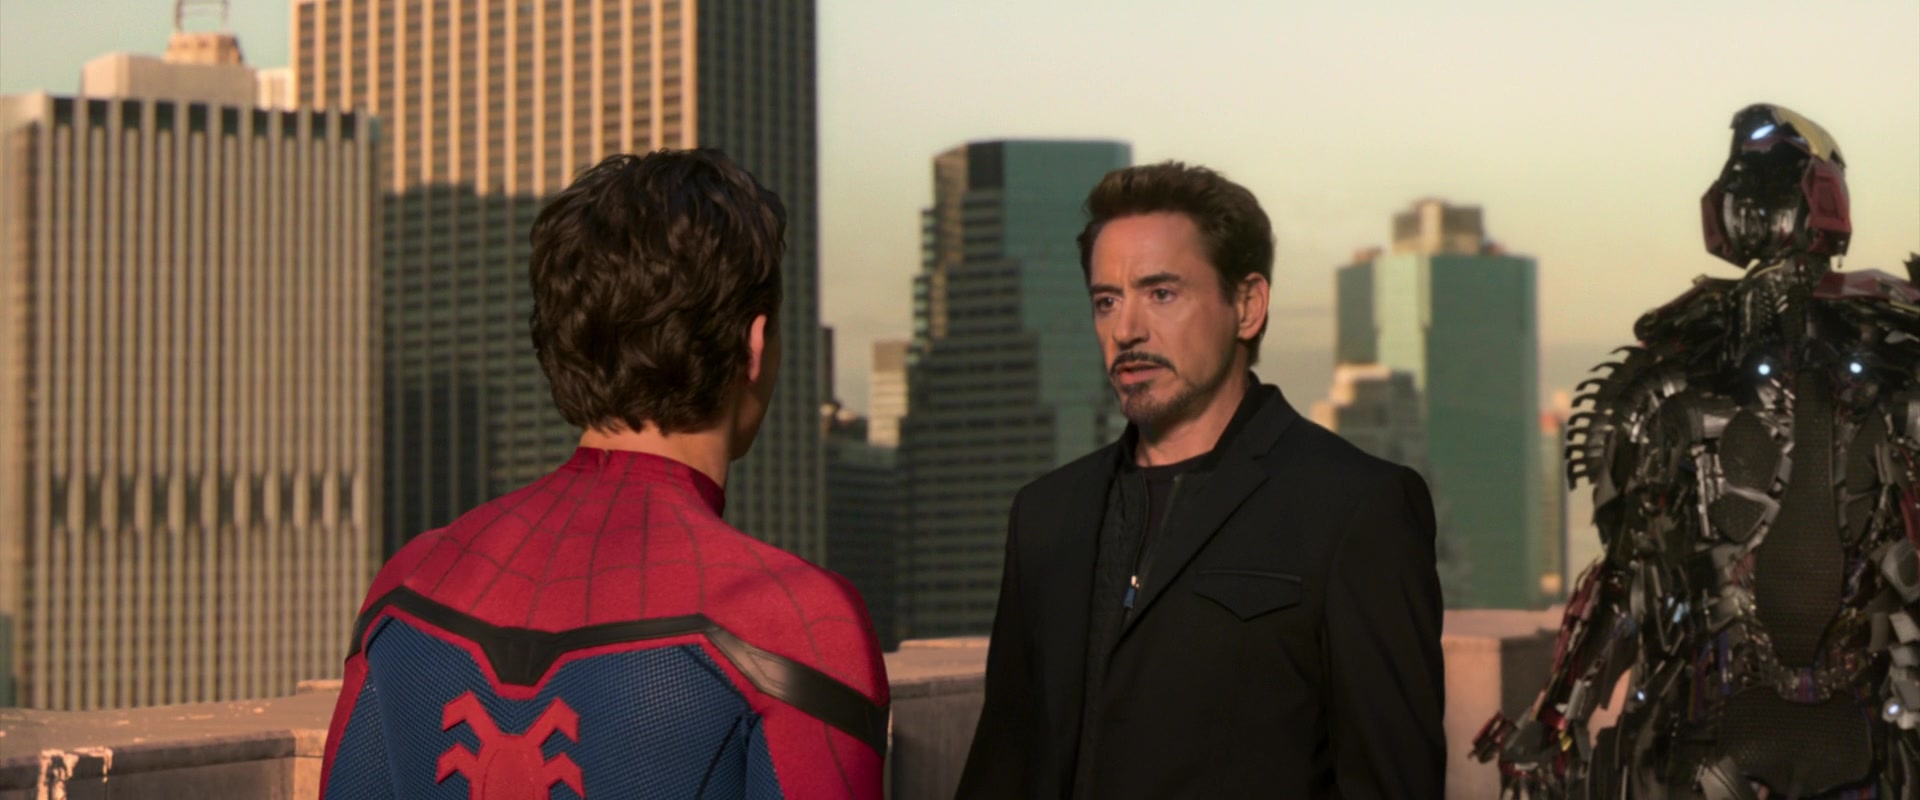 Tony Stark (Robert Downey Jr.) is unhappy with Peter Parker (Tom Holland) in Spider-Man: Homecoming (2017), Marvel Entertainment